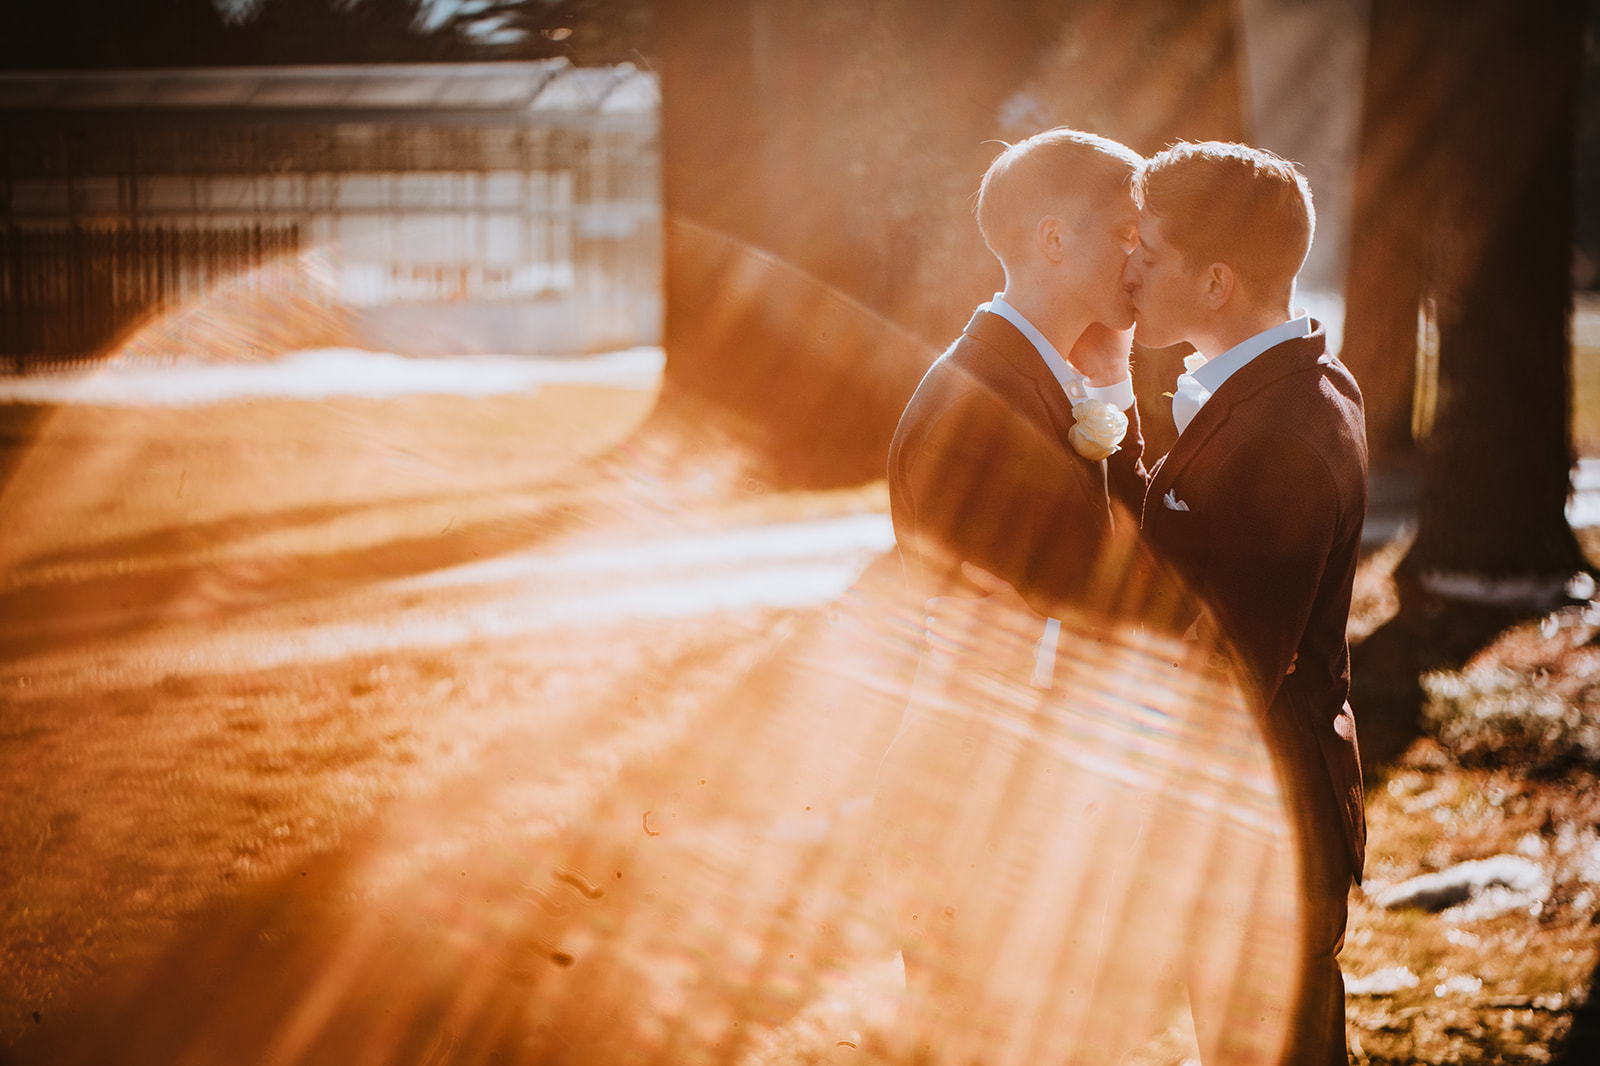 Queer winter wedding at Lundy Farm